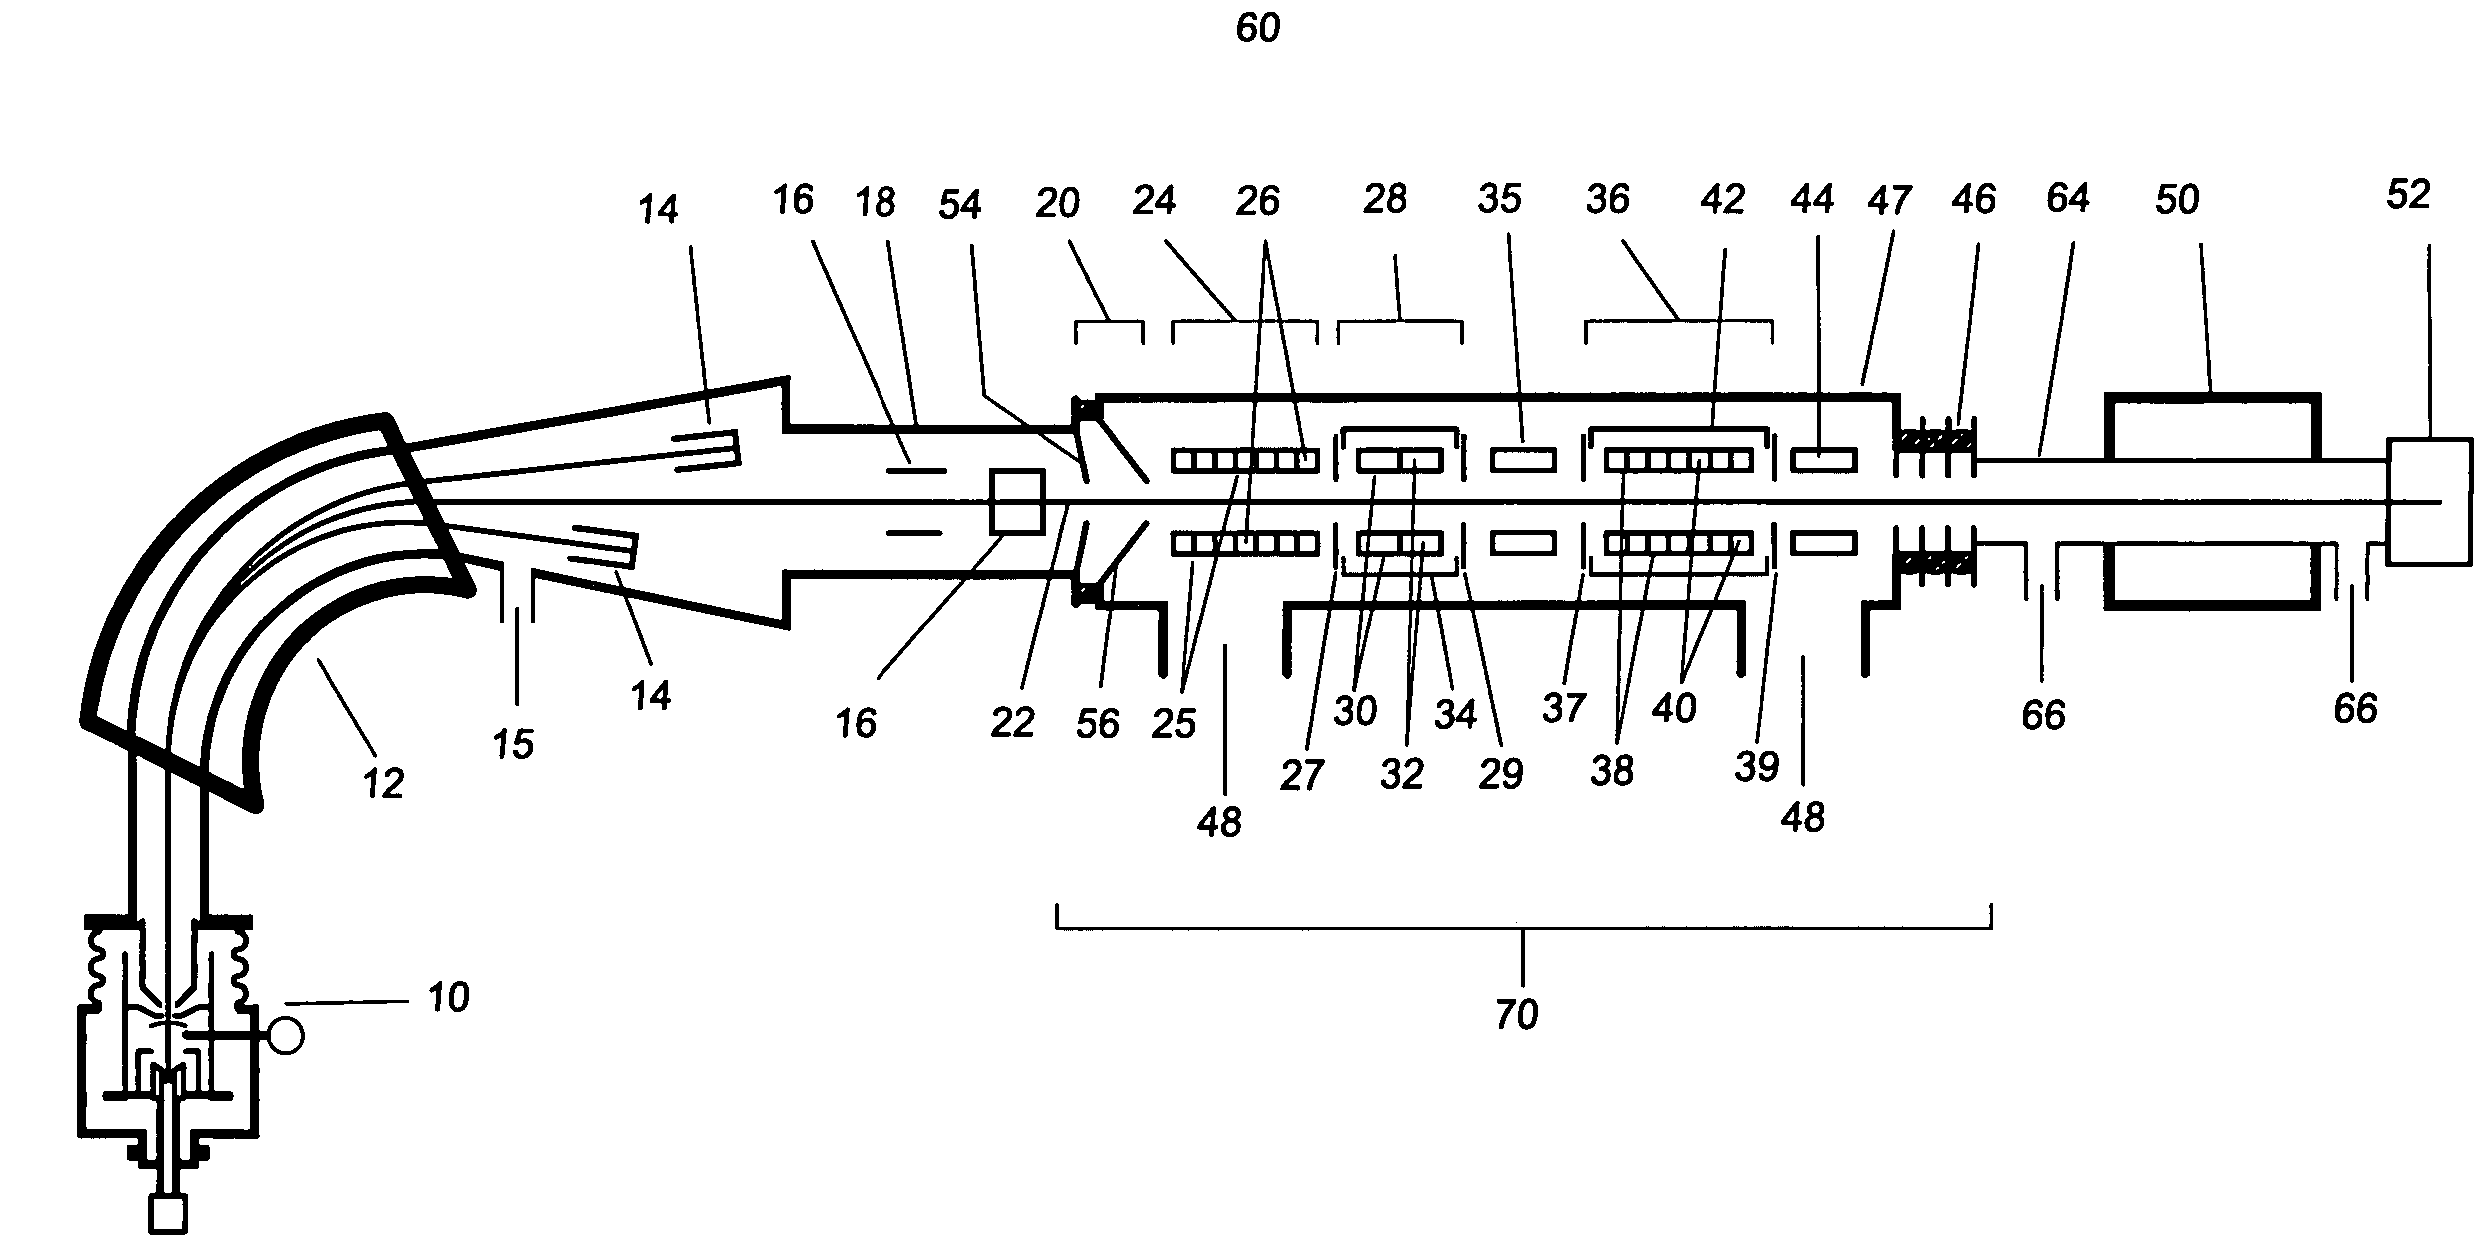 Method and apparatus for separation of isobaric interferences